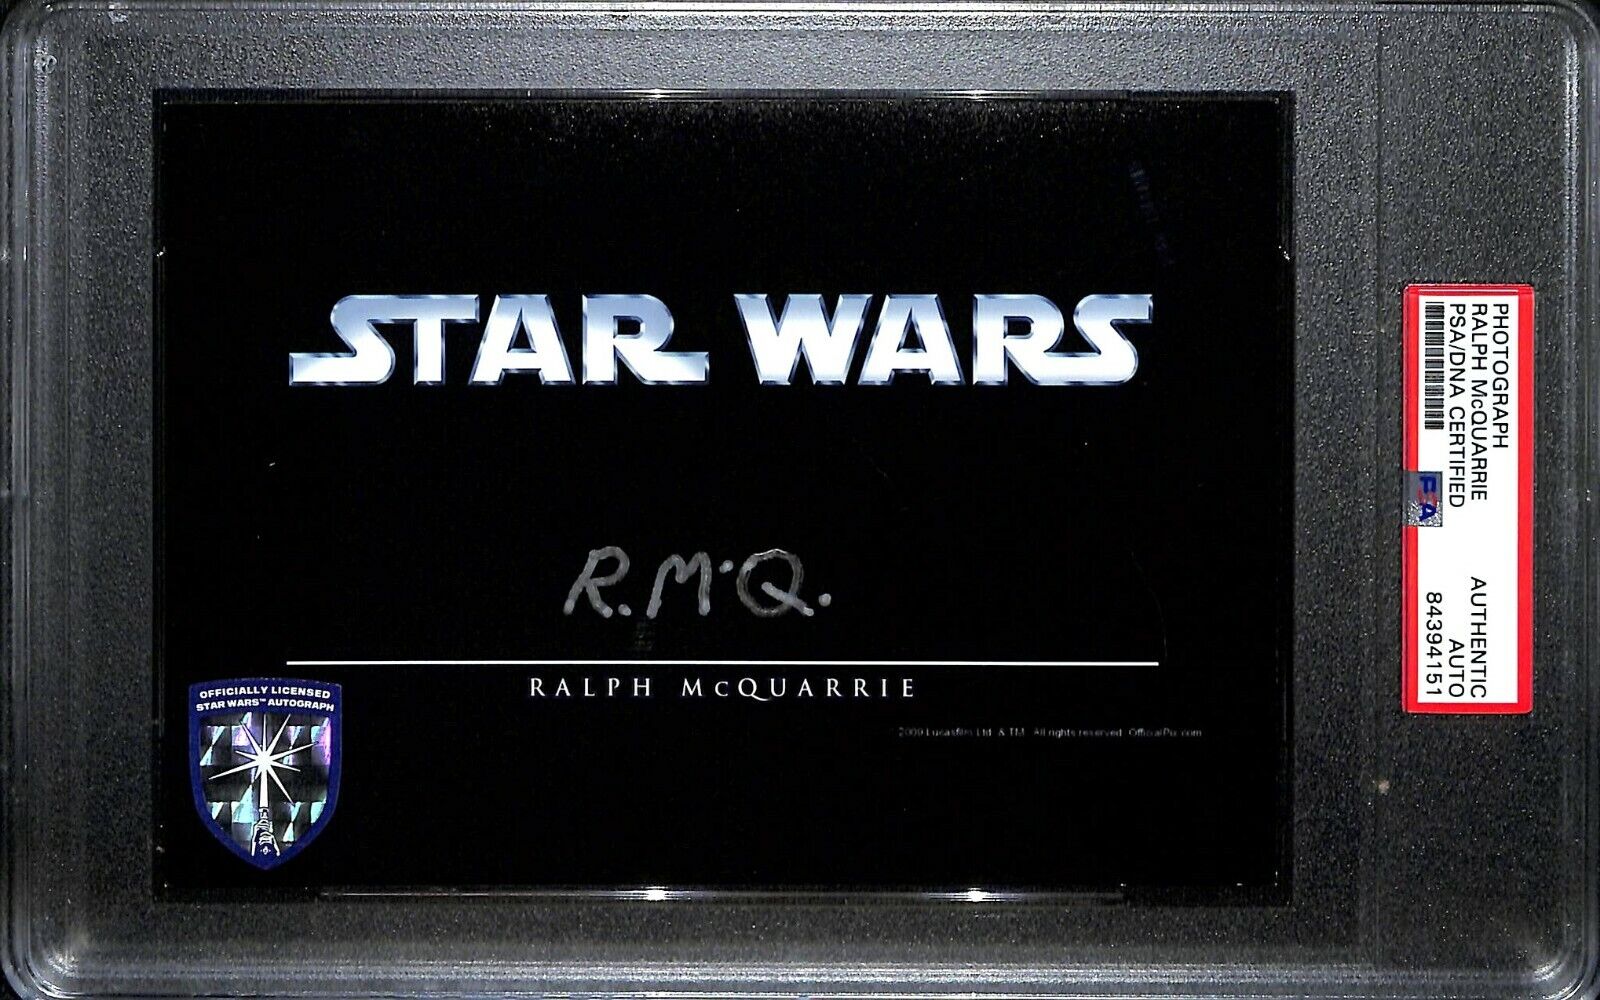 RALPH McQUARRIE Signed Auto STAR WARS 5x7 Official Pix Photo Poster painting PSA/DNA SLABBED